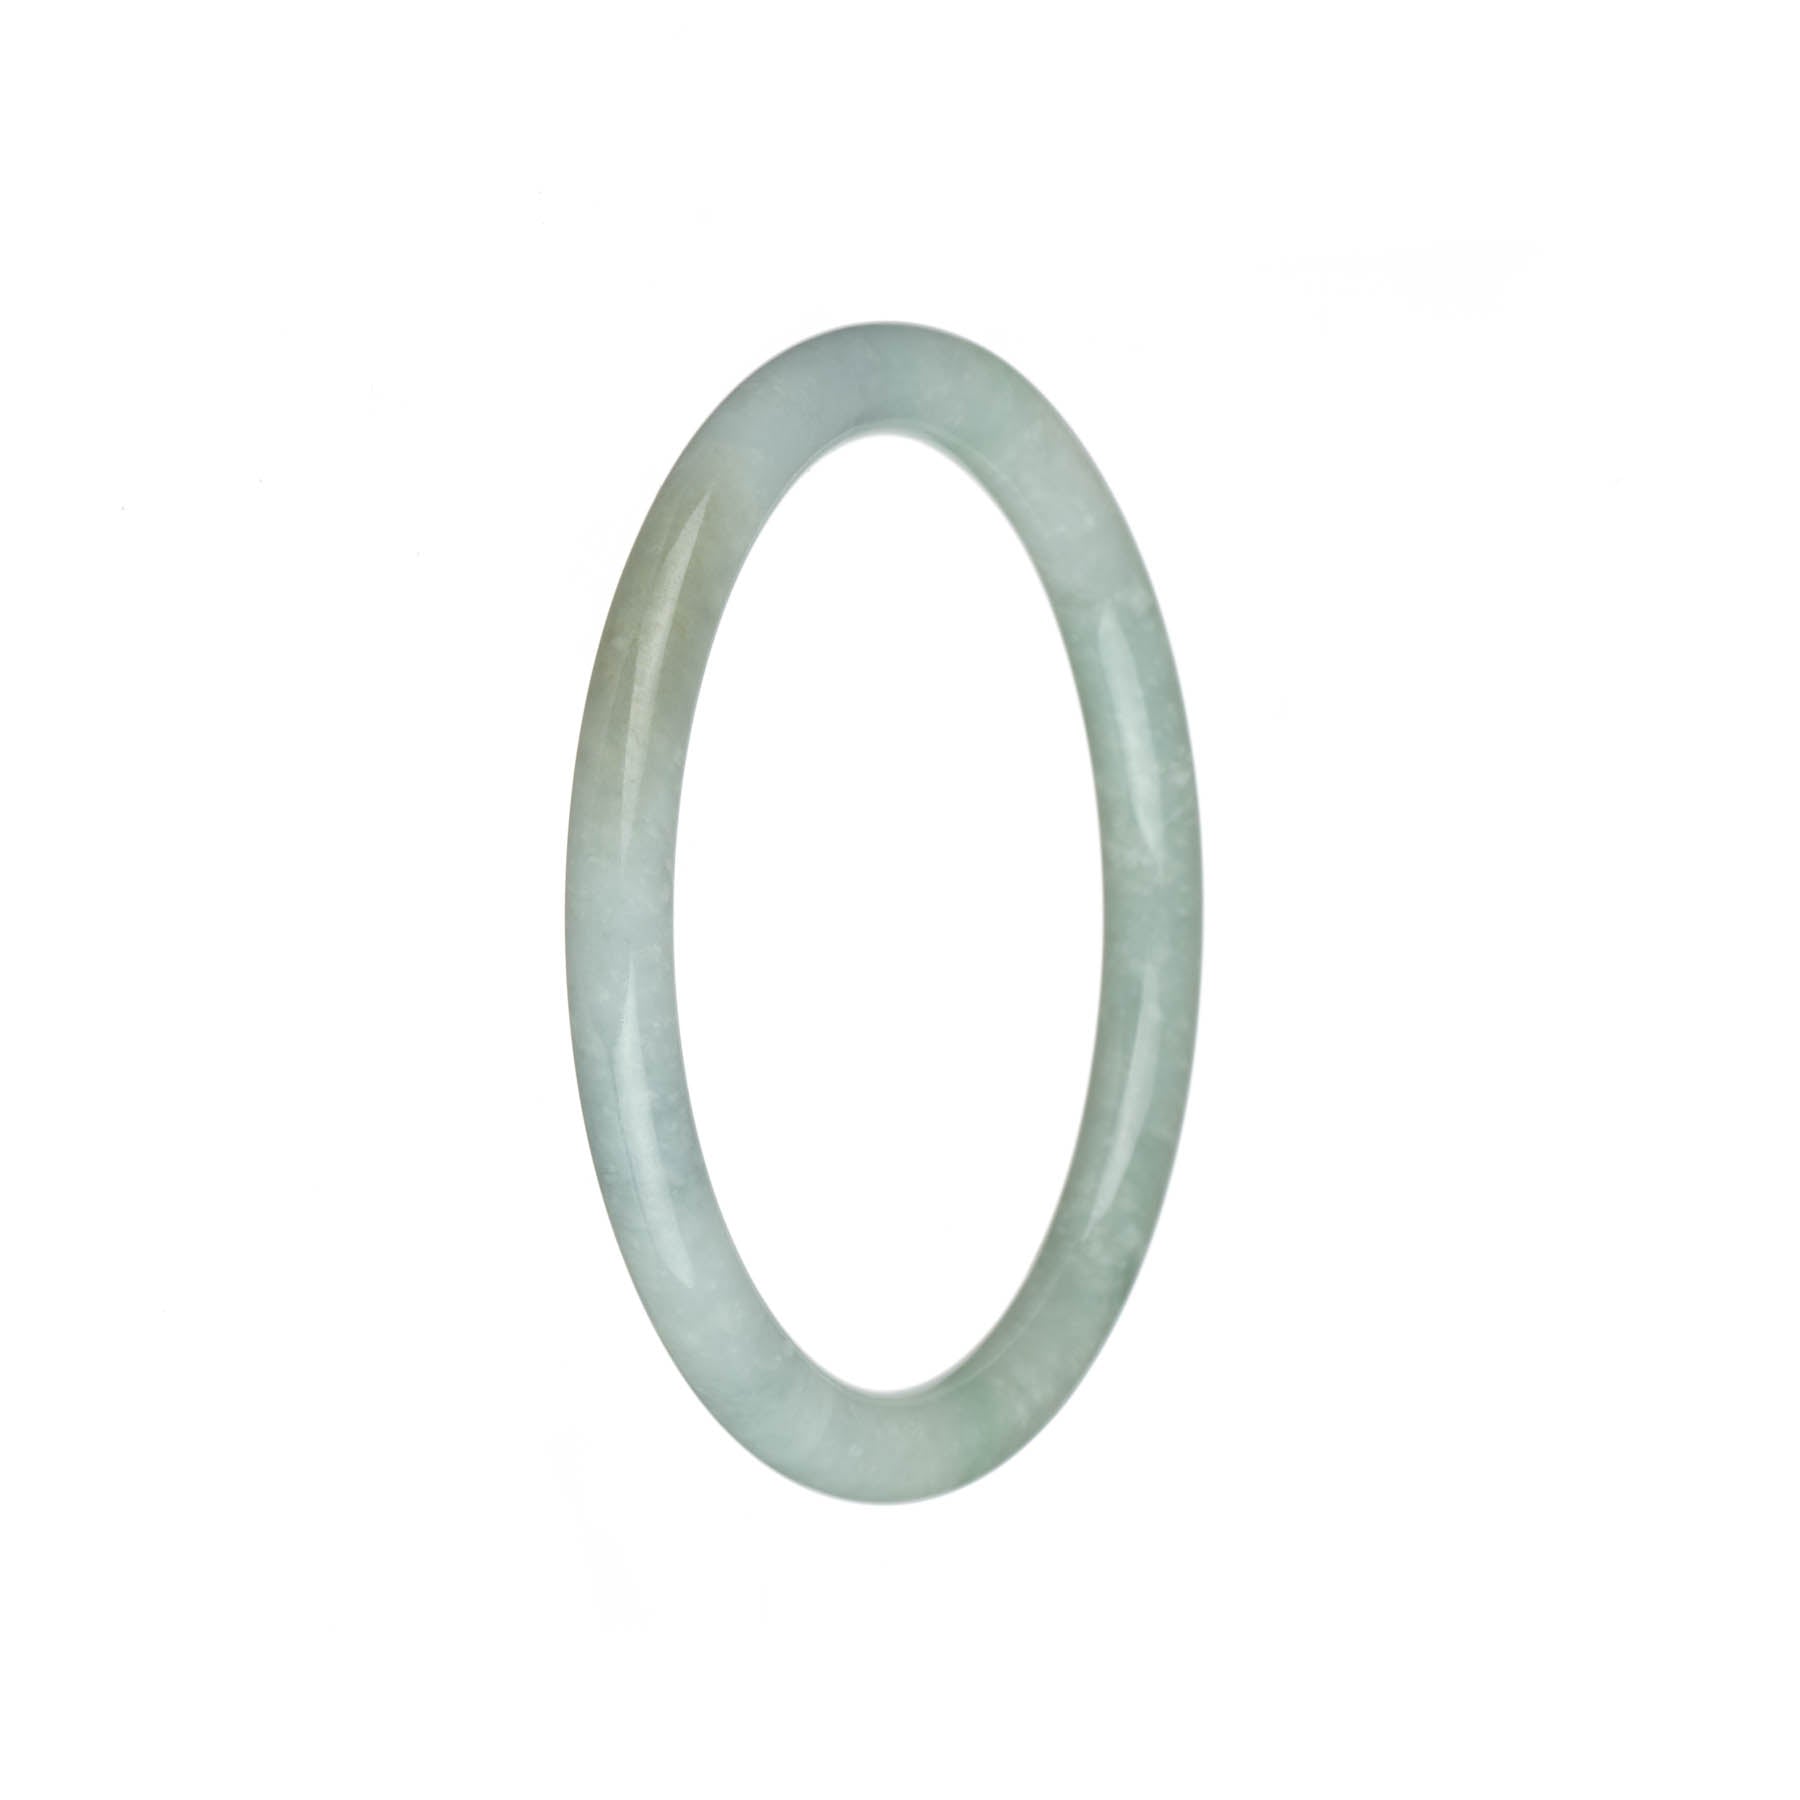 Certified Natural White with Pale Green Traditional Jade Bangle Bracelet - 61mm Petite Round